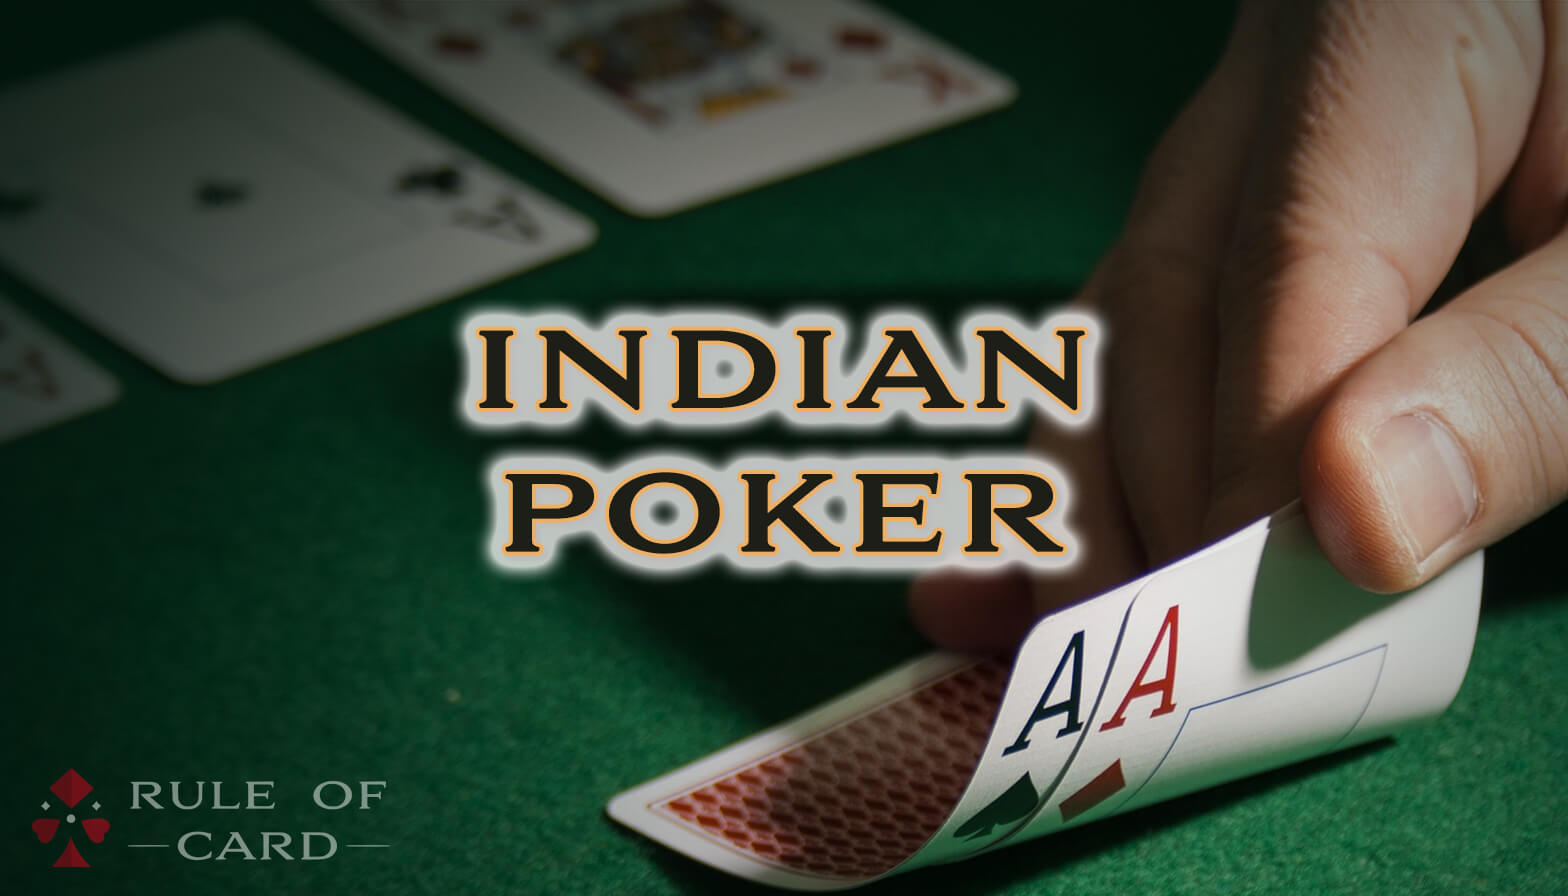 Playing the card game Indian Poker